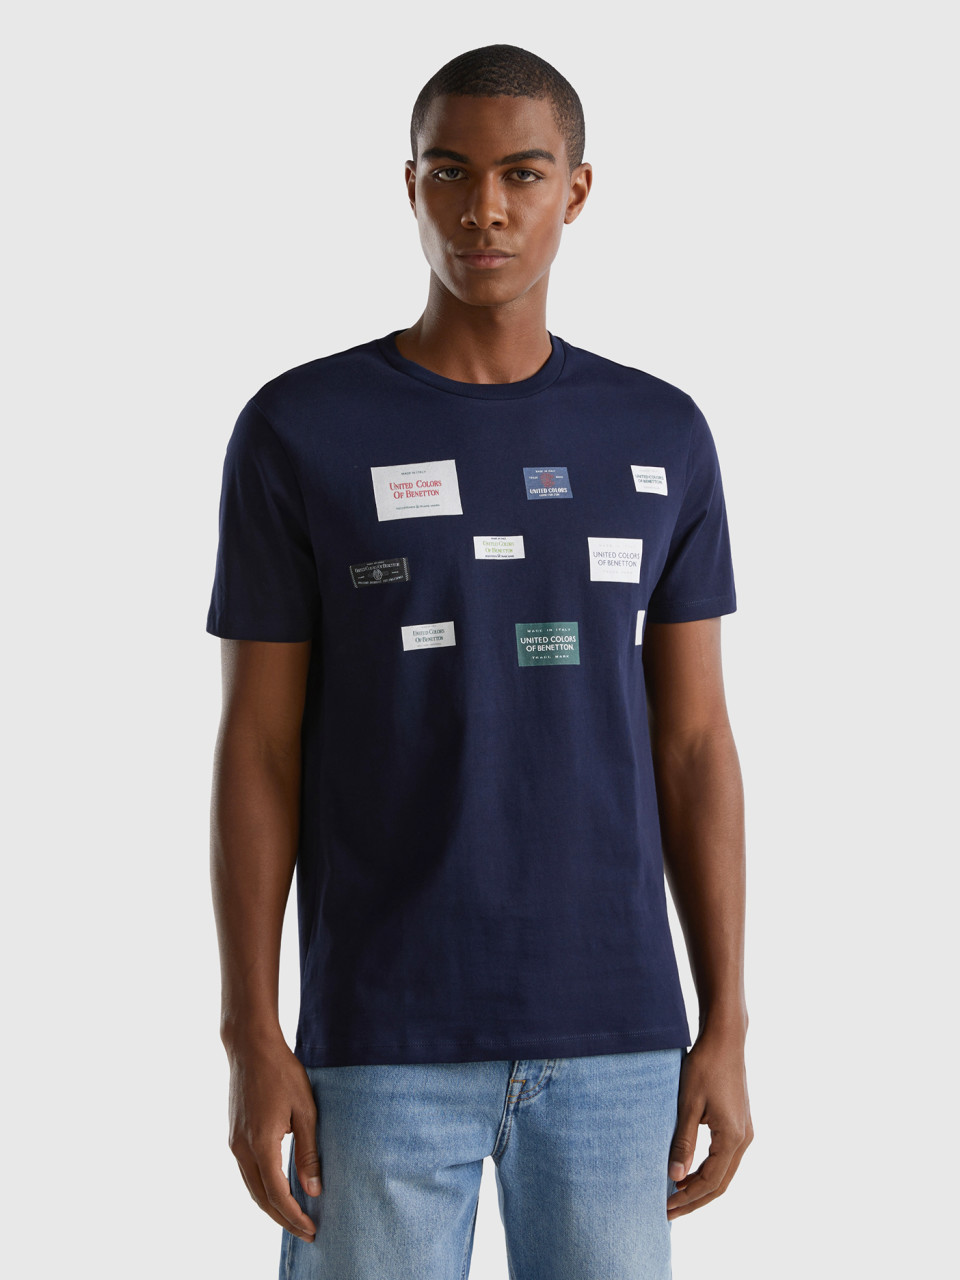 Benetton, Relaxed Fit T-shirt With Print, Dark Blue, Men